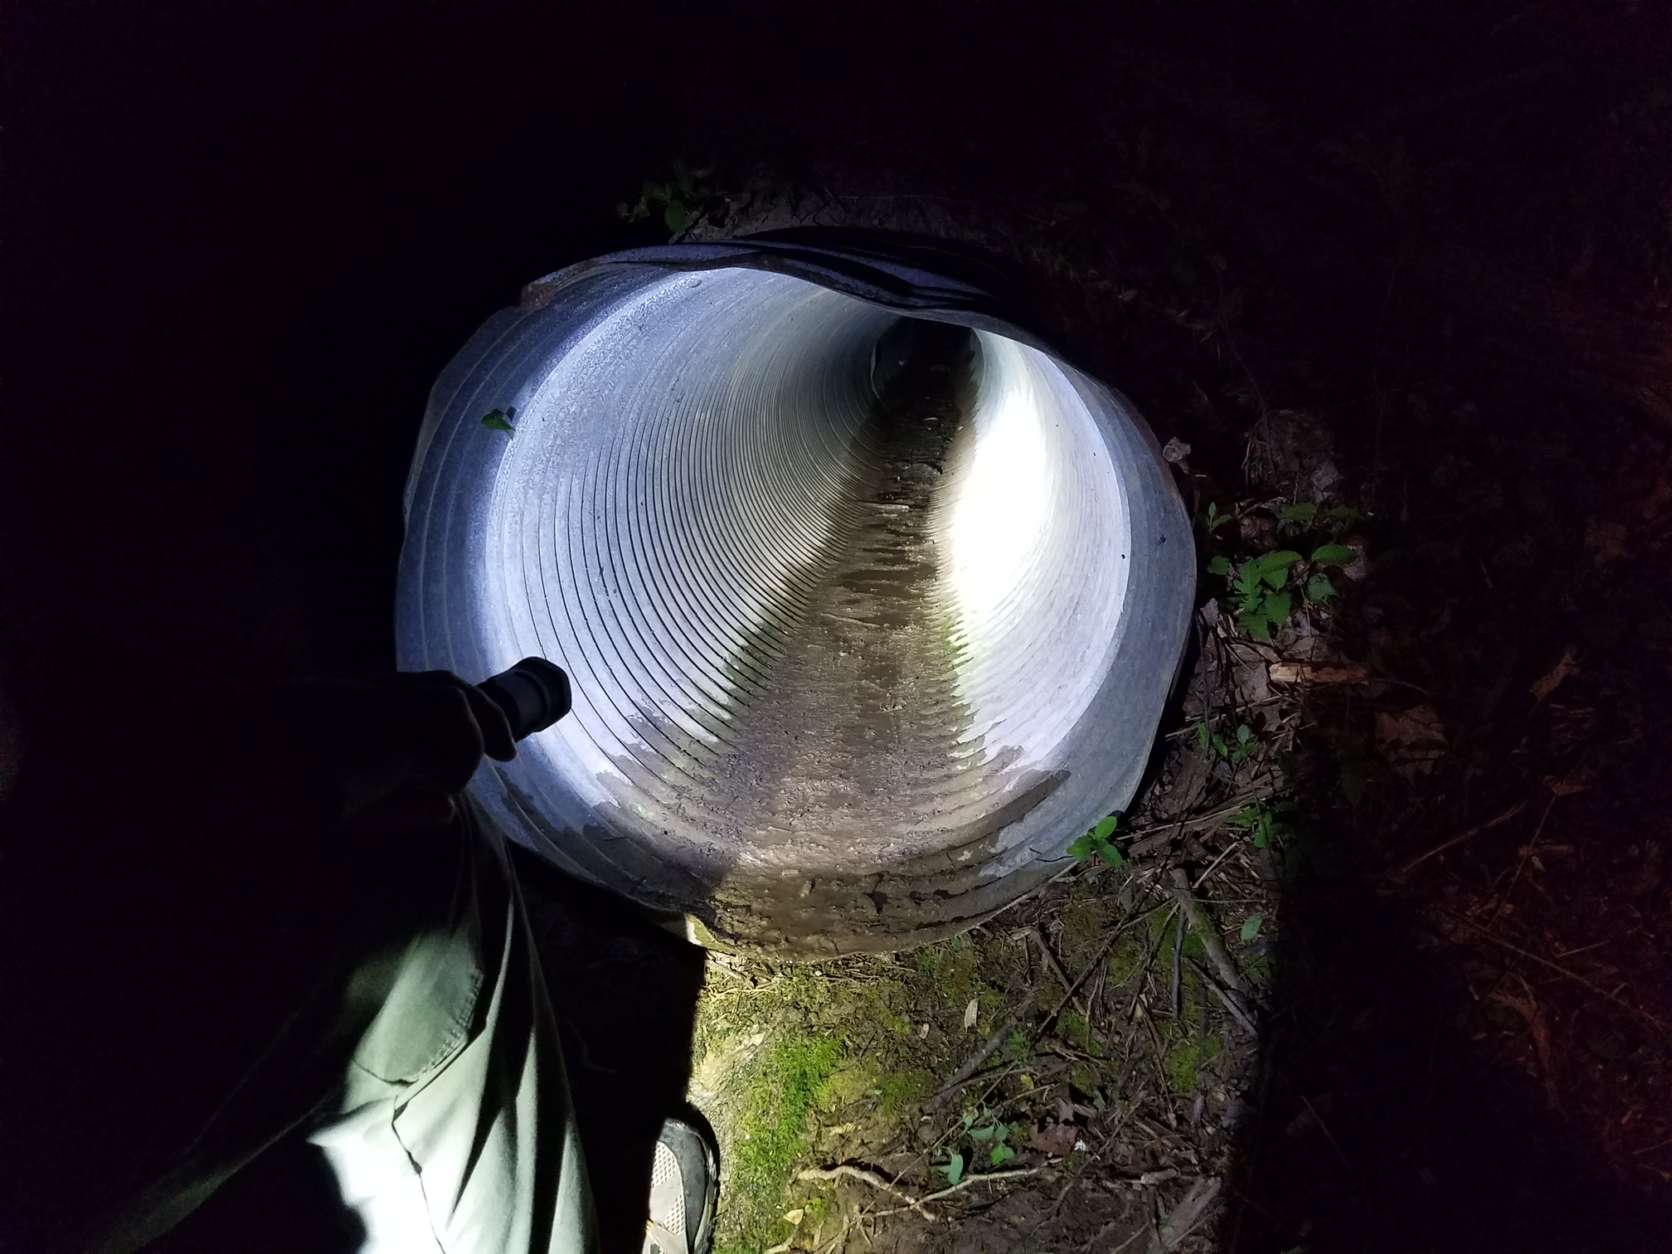 Escaped prisoner David Watson was hiding in this narrow drainage pipe when he apprehended Wednesday night. (Courtesy Howard Co. Police)